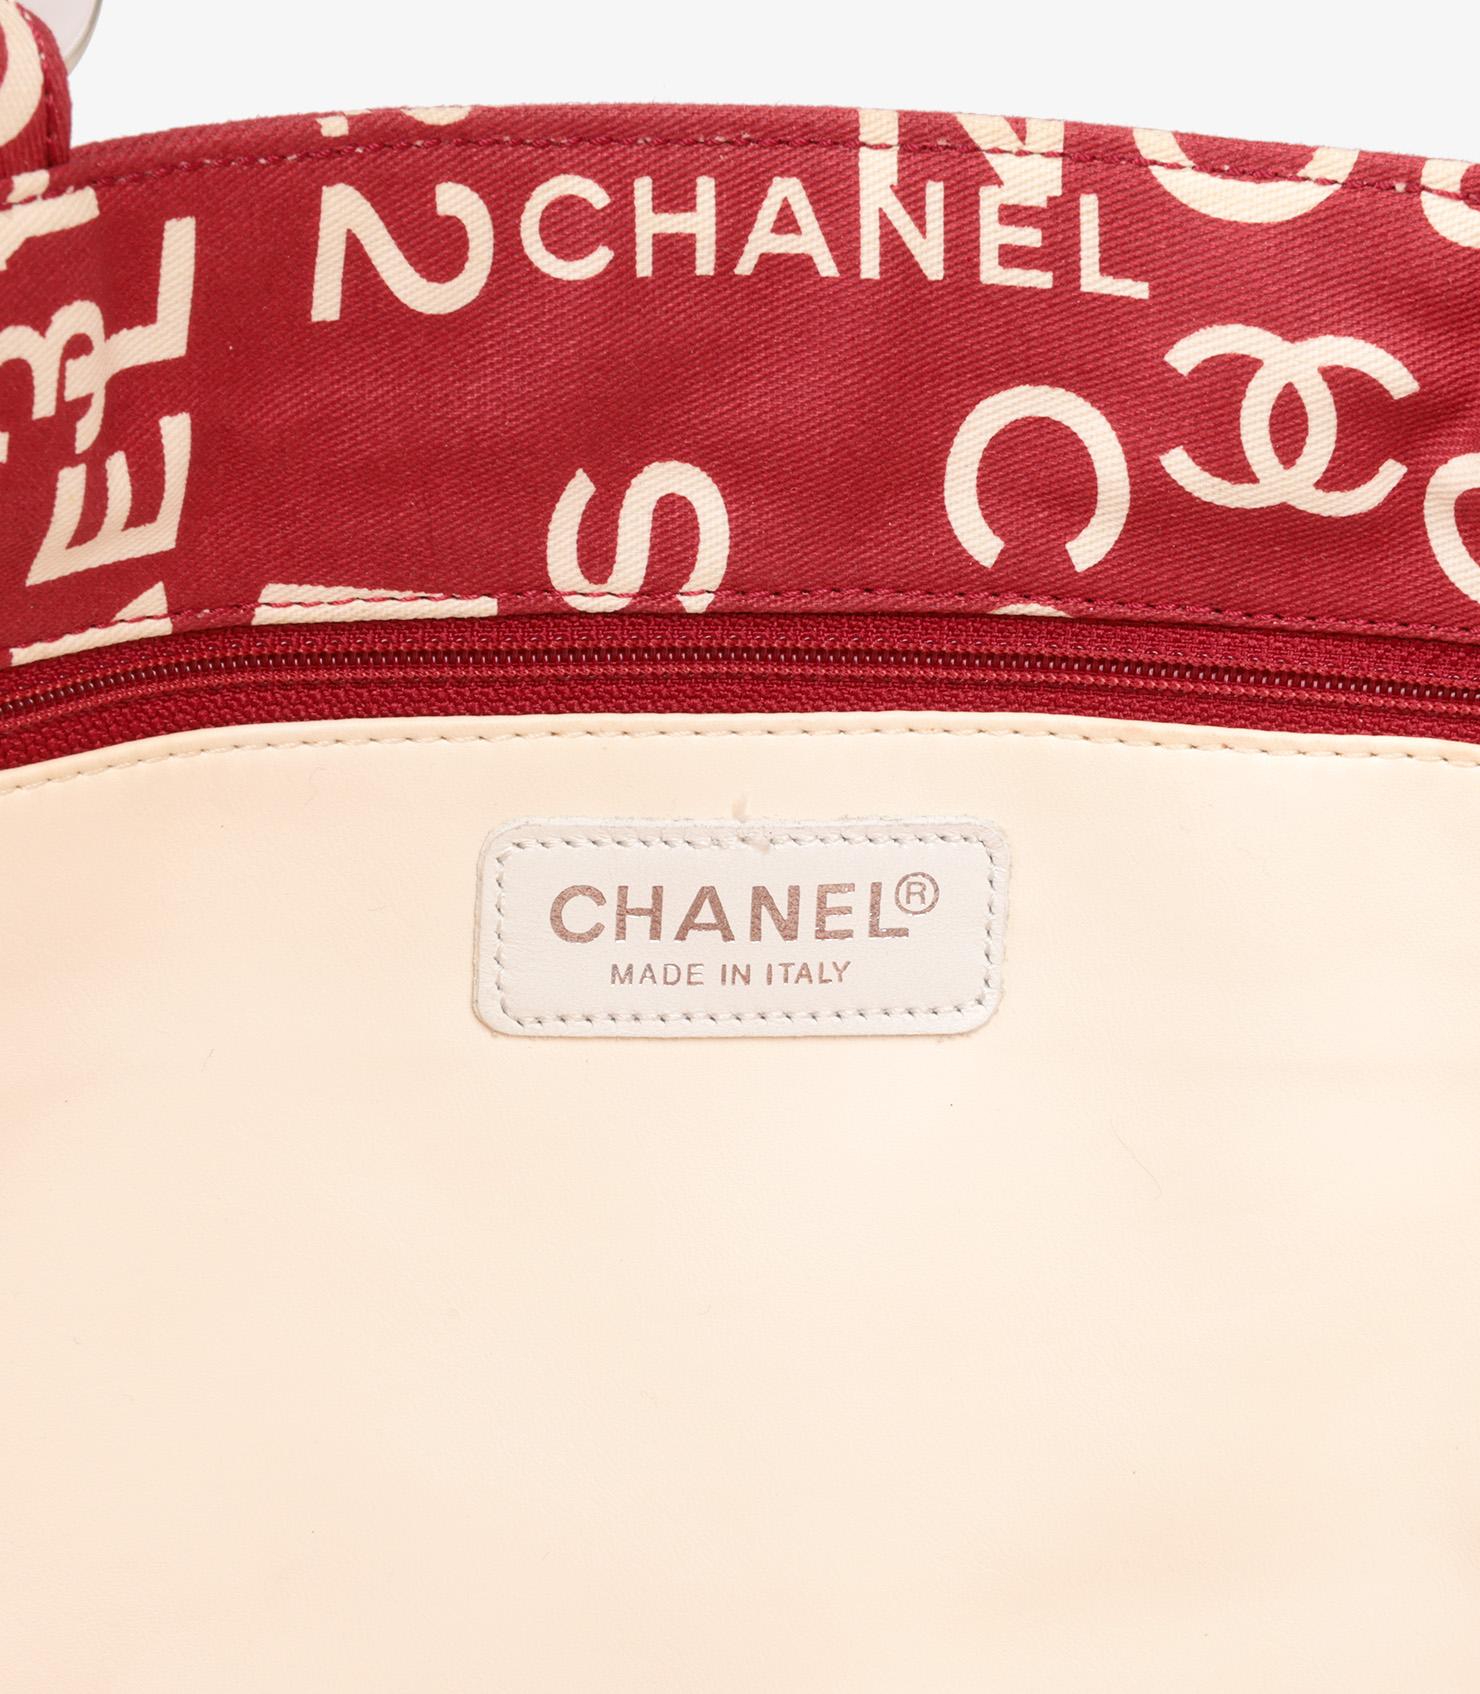 Chanel Red & White Patterned Canvas Vintage 31 Rue Cambon Beach Tote For Sale 4